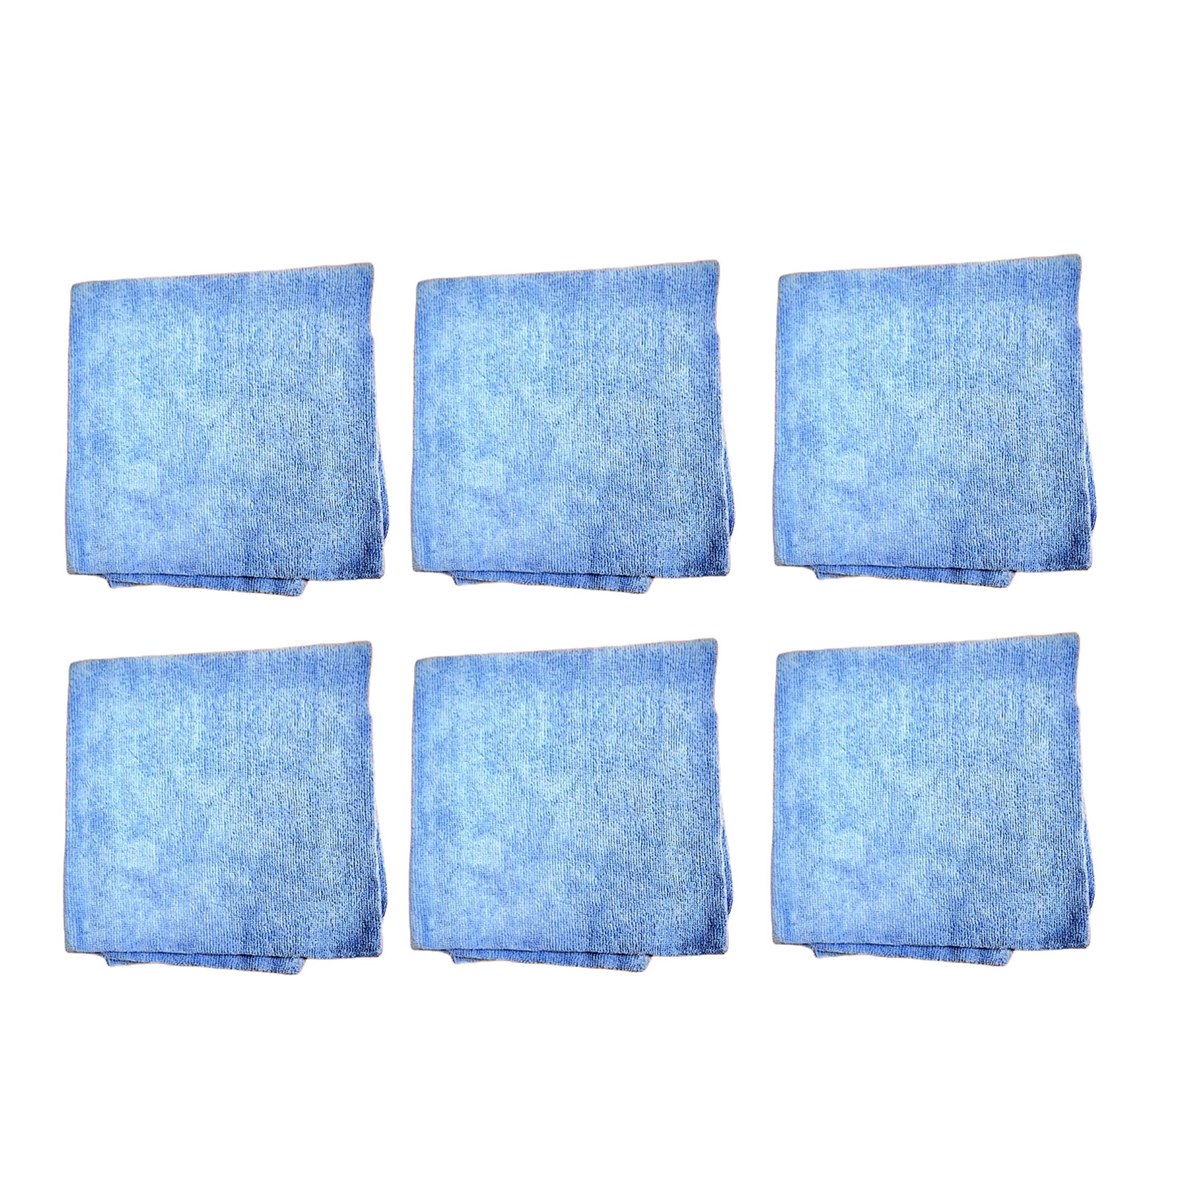 Case of 6 x Microfibre Cleaning Cloth 250gsm Blue 40x40cm